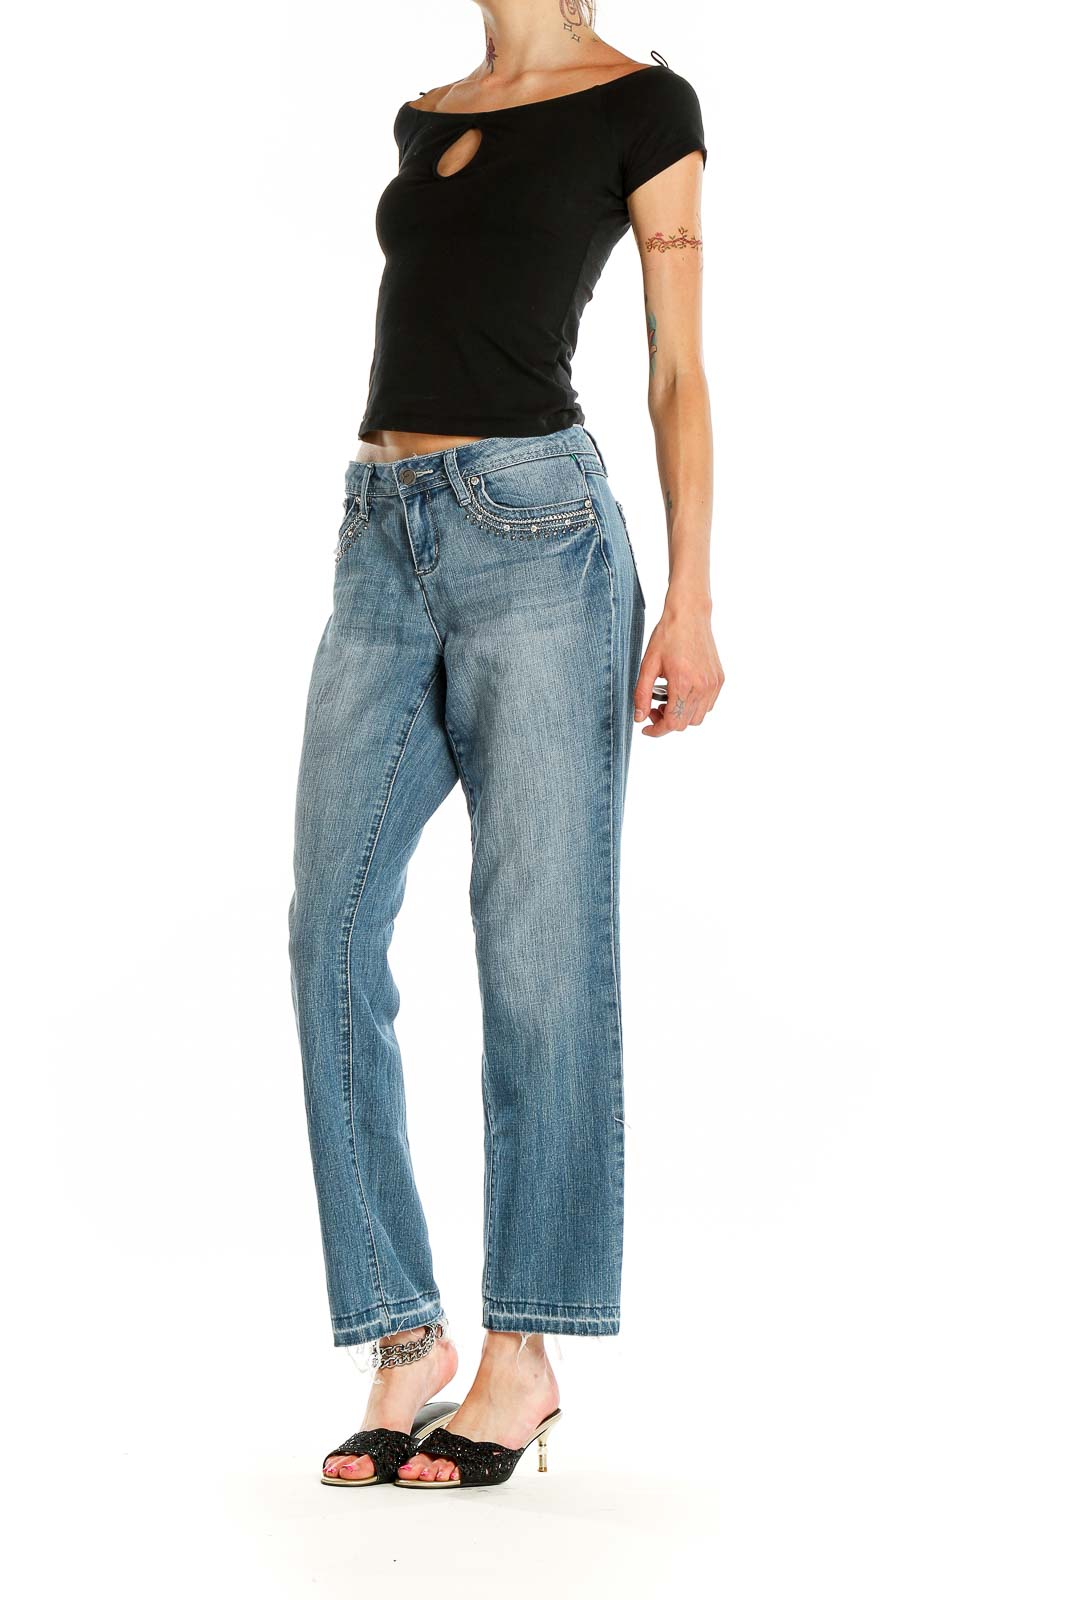 Earl Jeans - Blue Embellished Retro Jeans Polyester Cotton Spandex